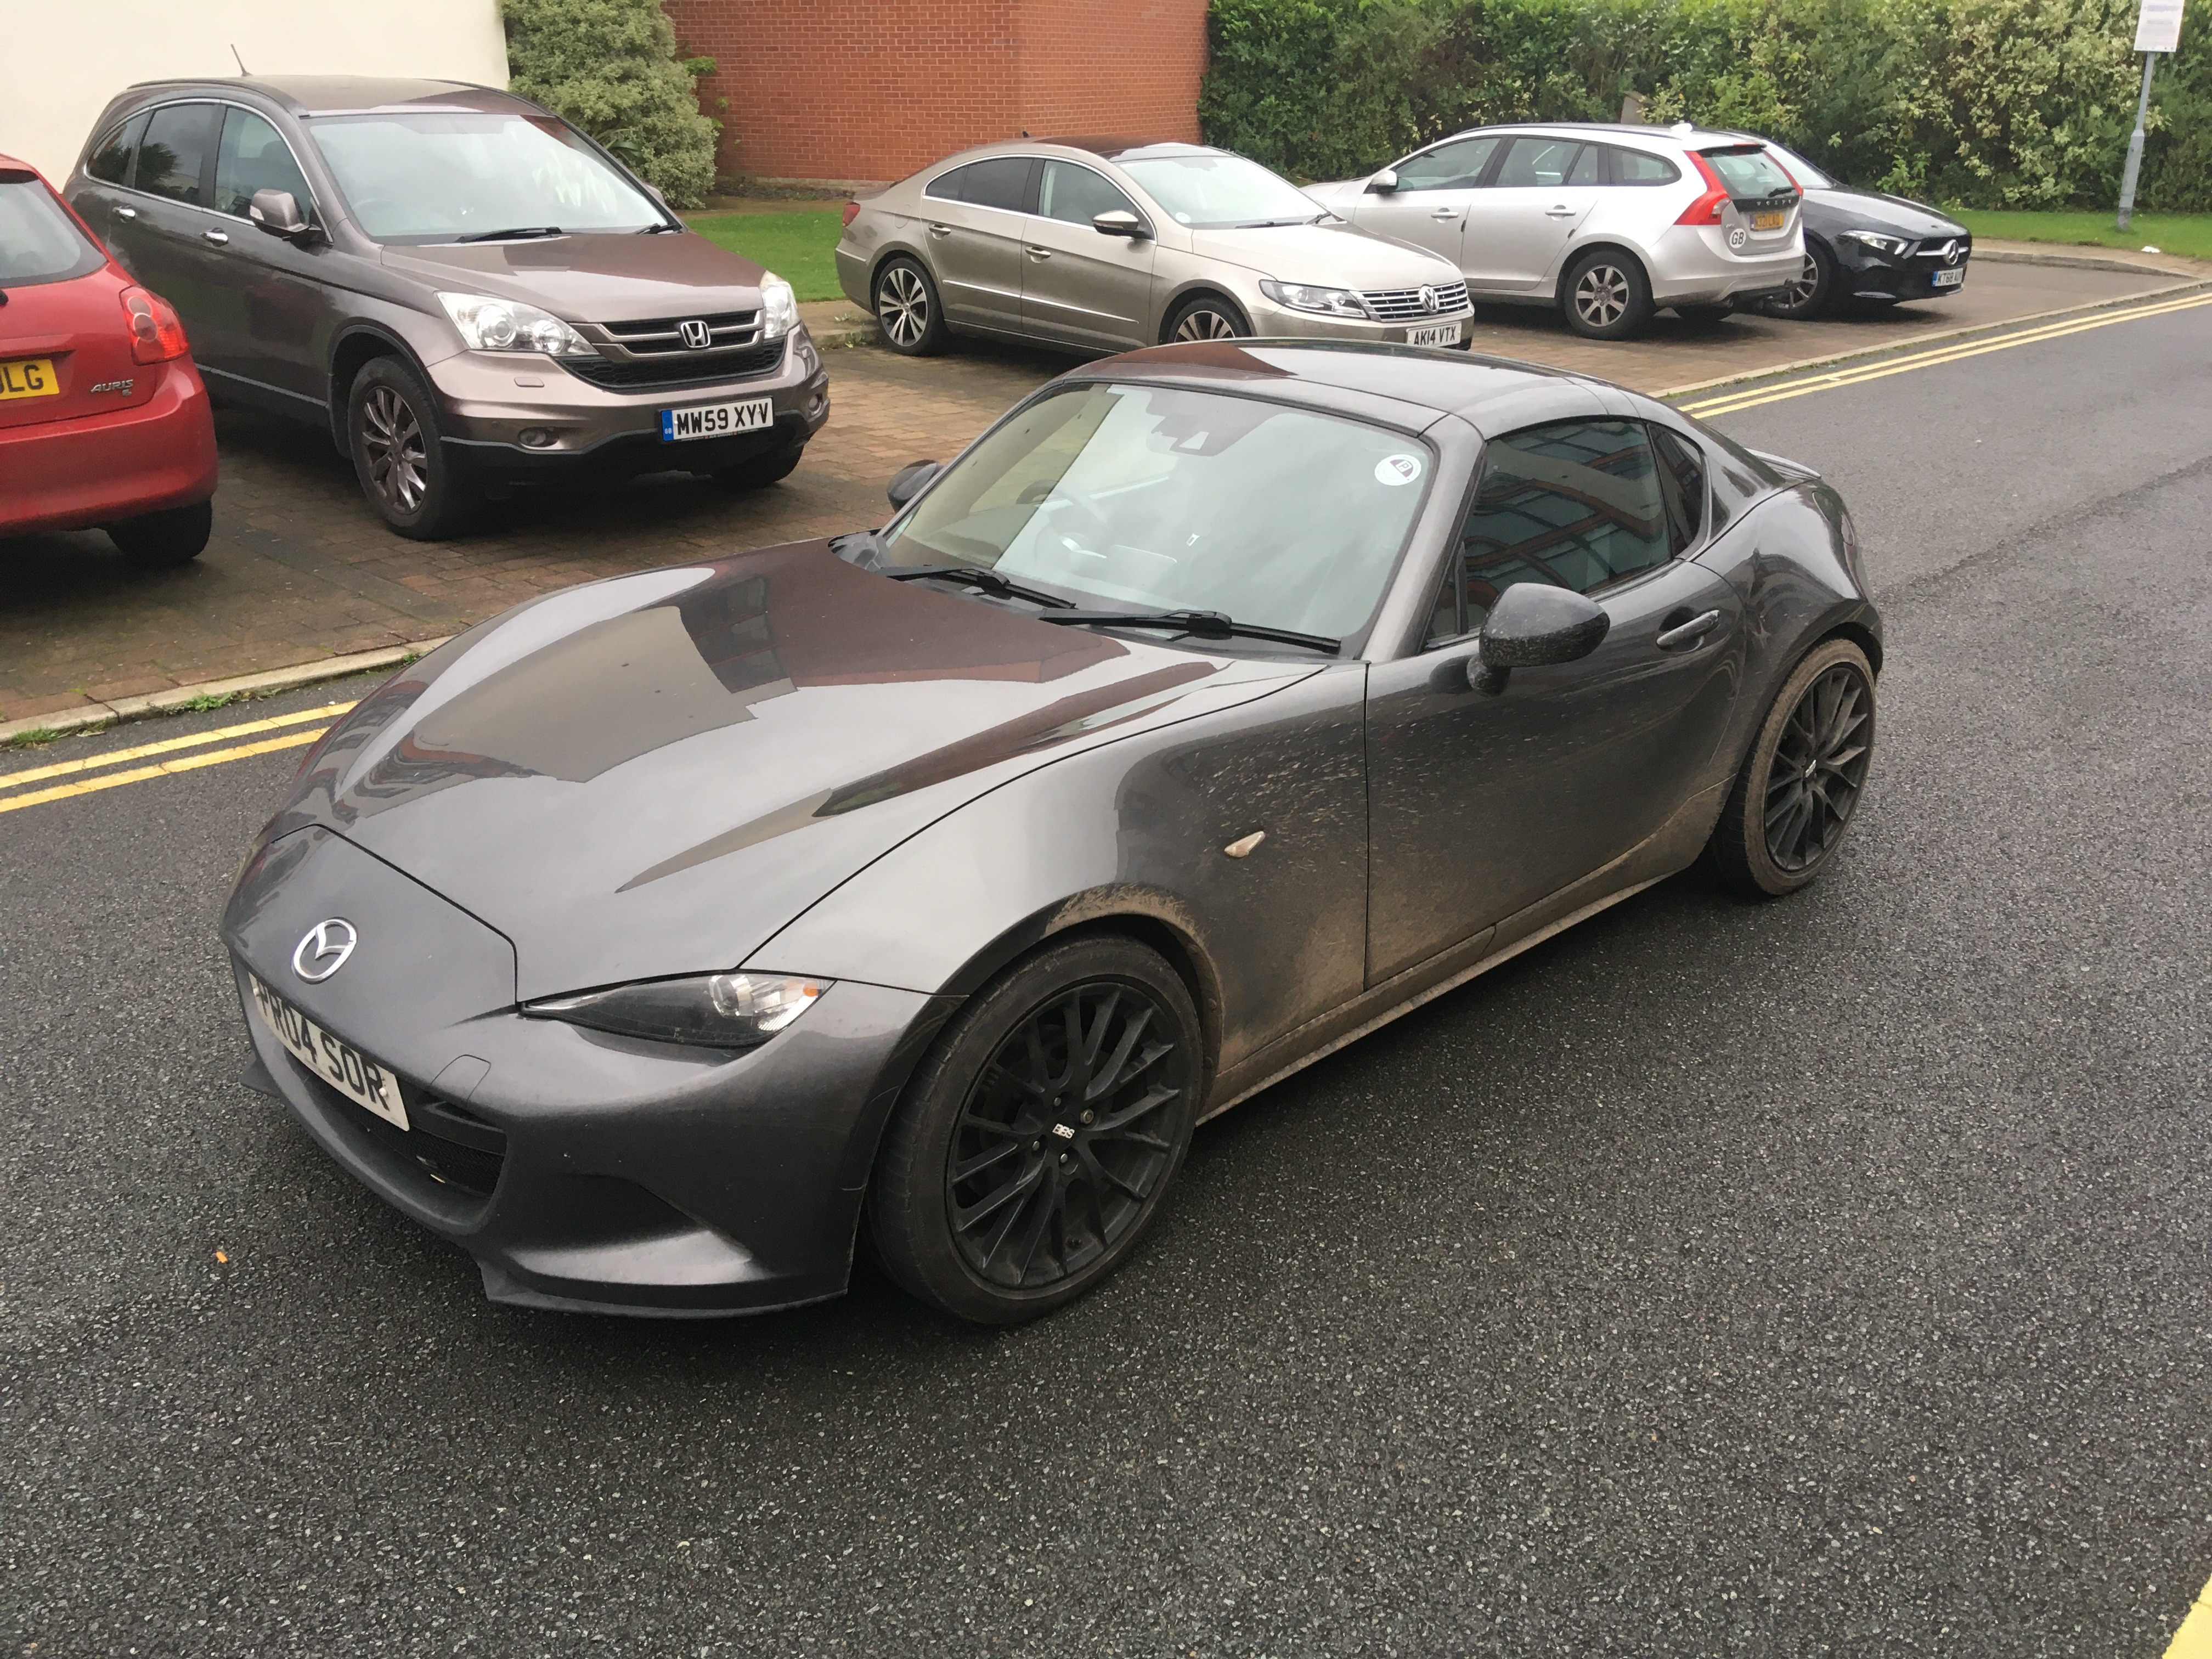 NA,NB,NC or ND - What is your favourite colour MX-5? - MX-5 Chat